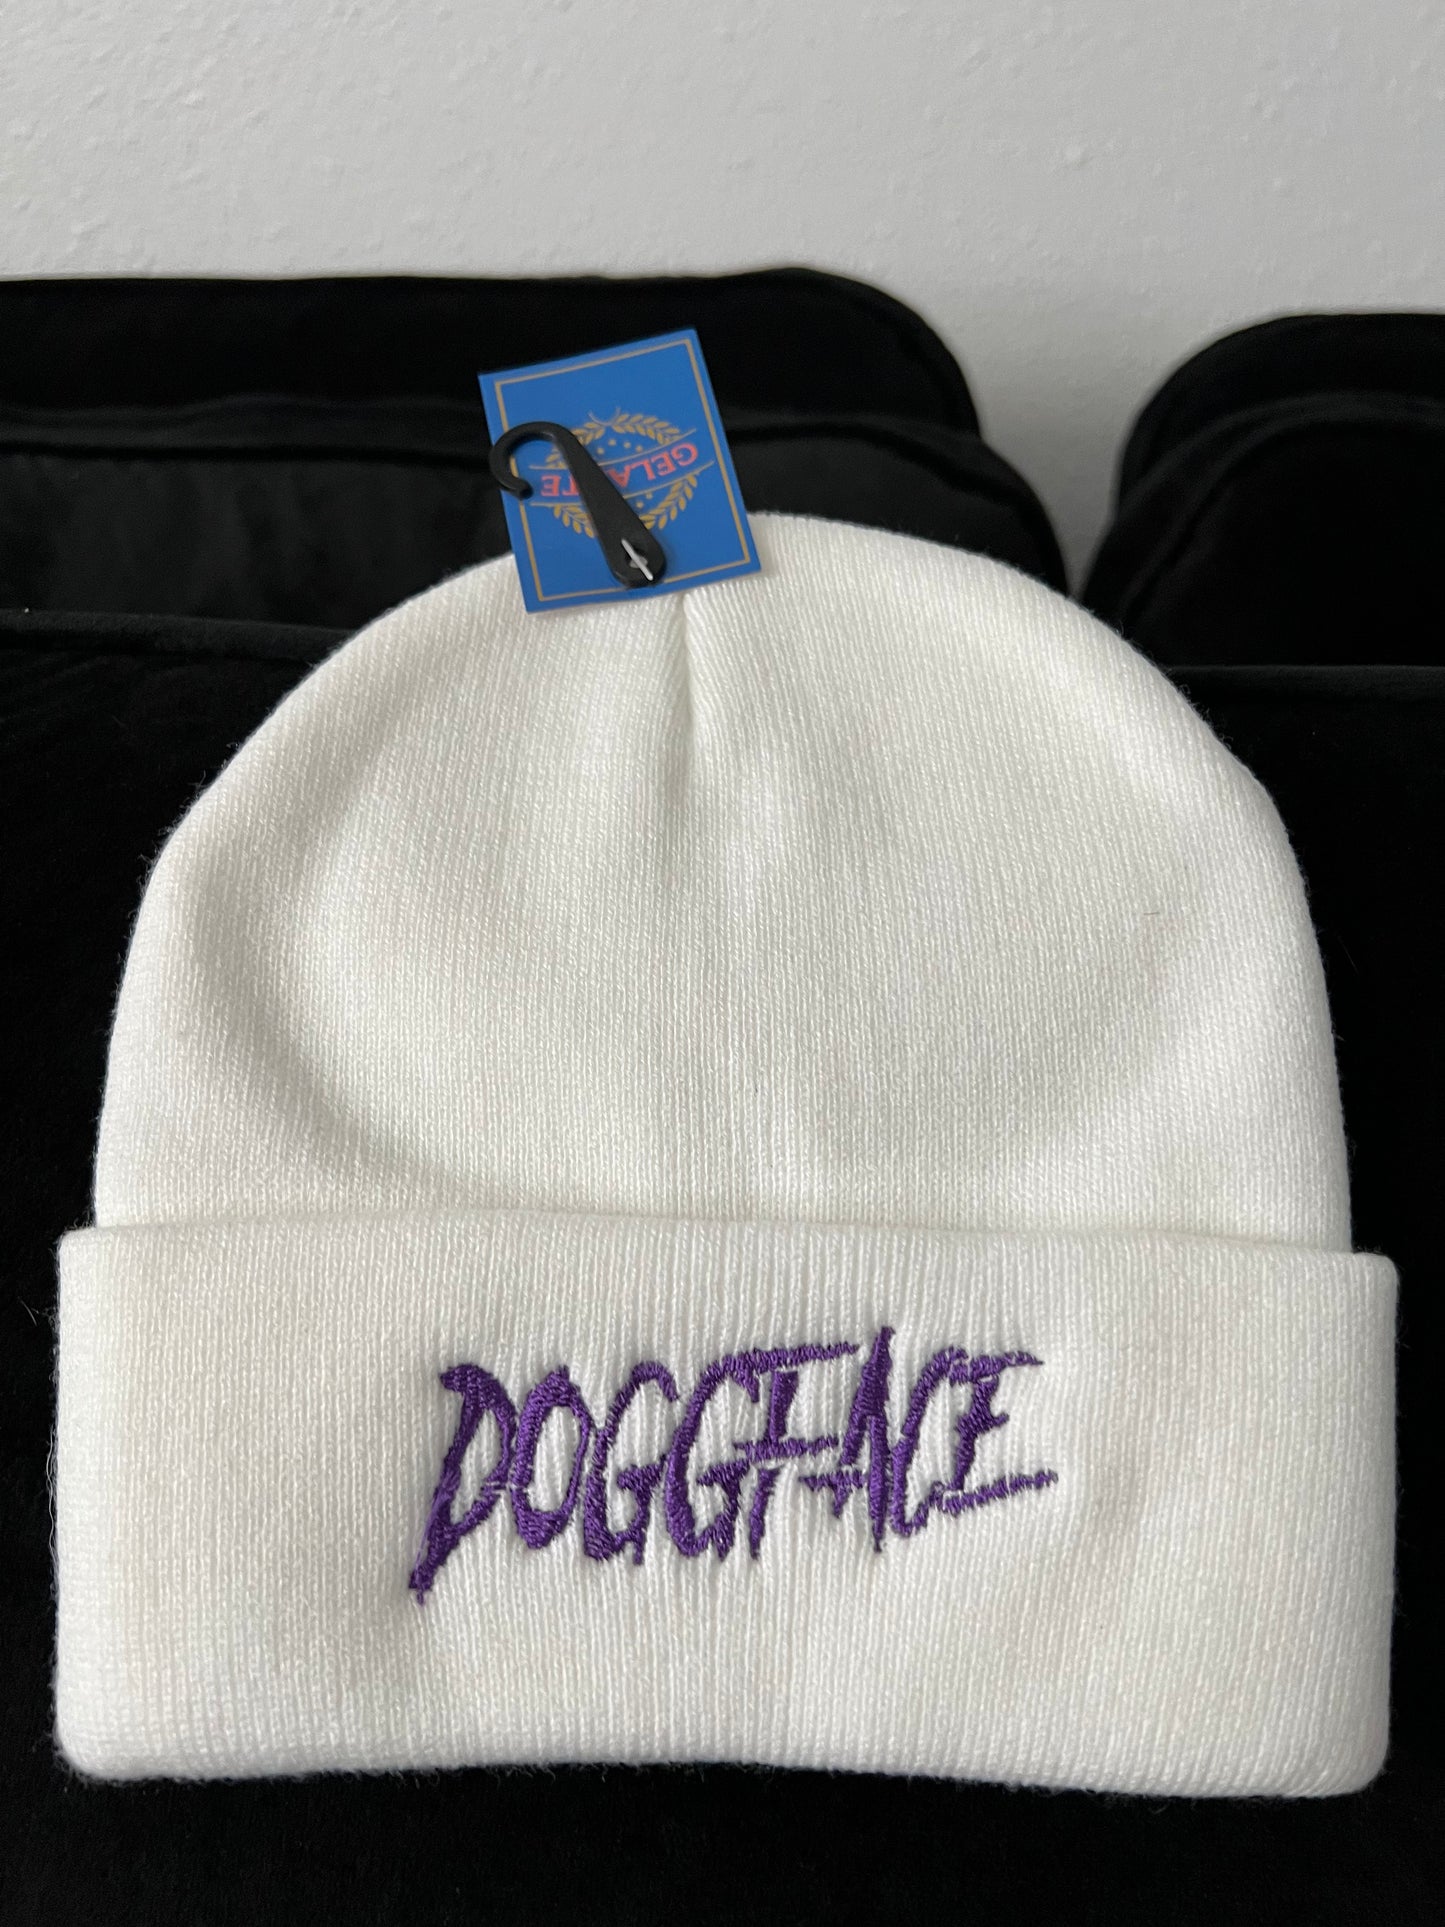 Doggface beanies or personalized